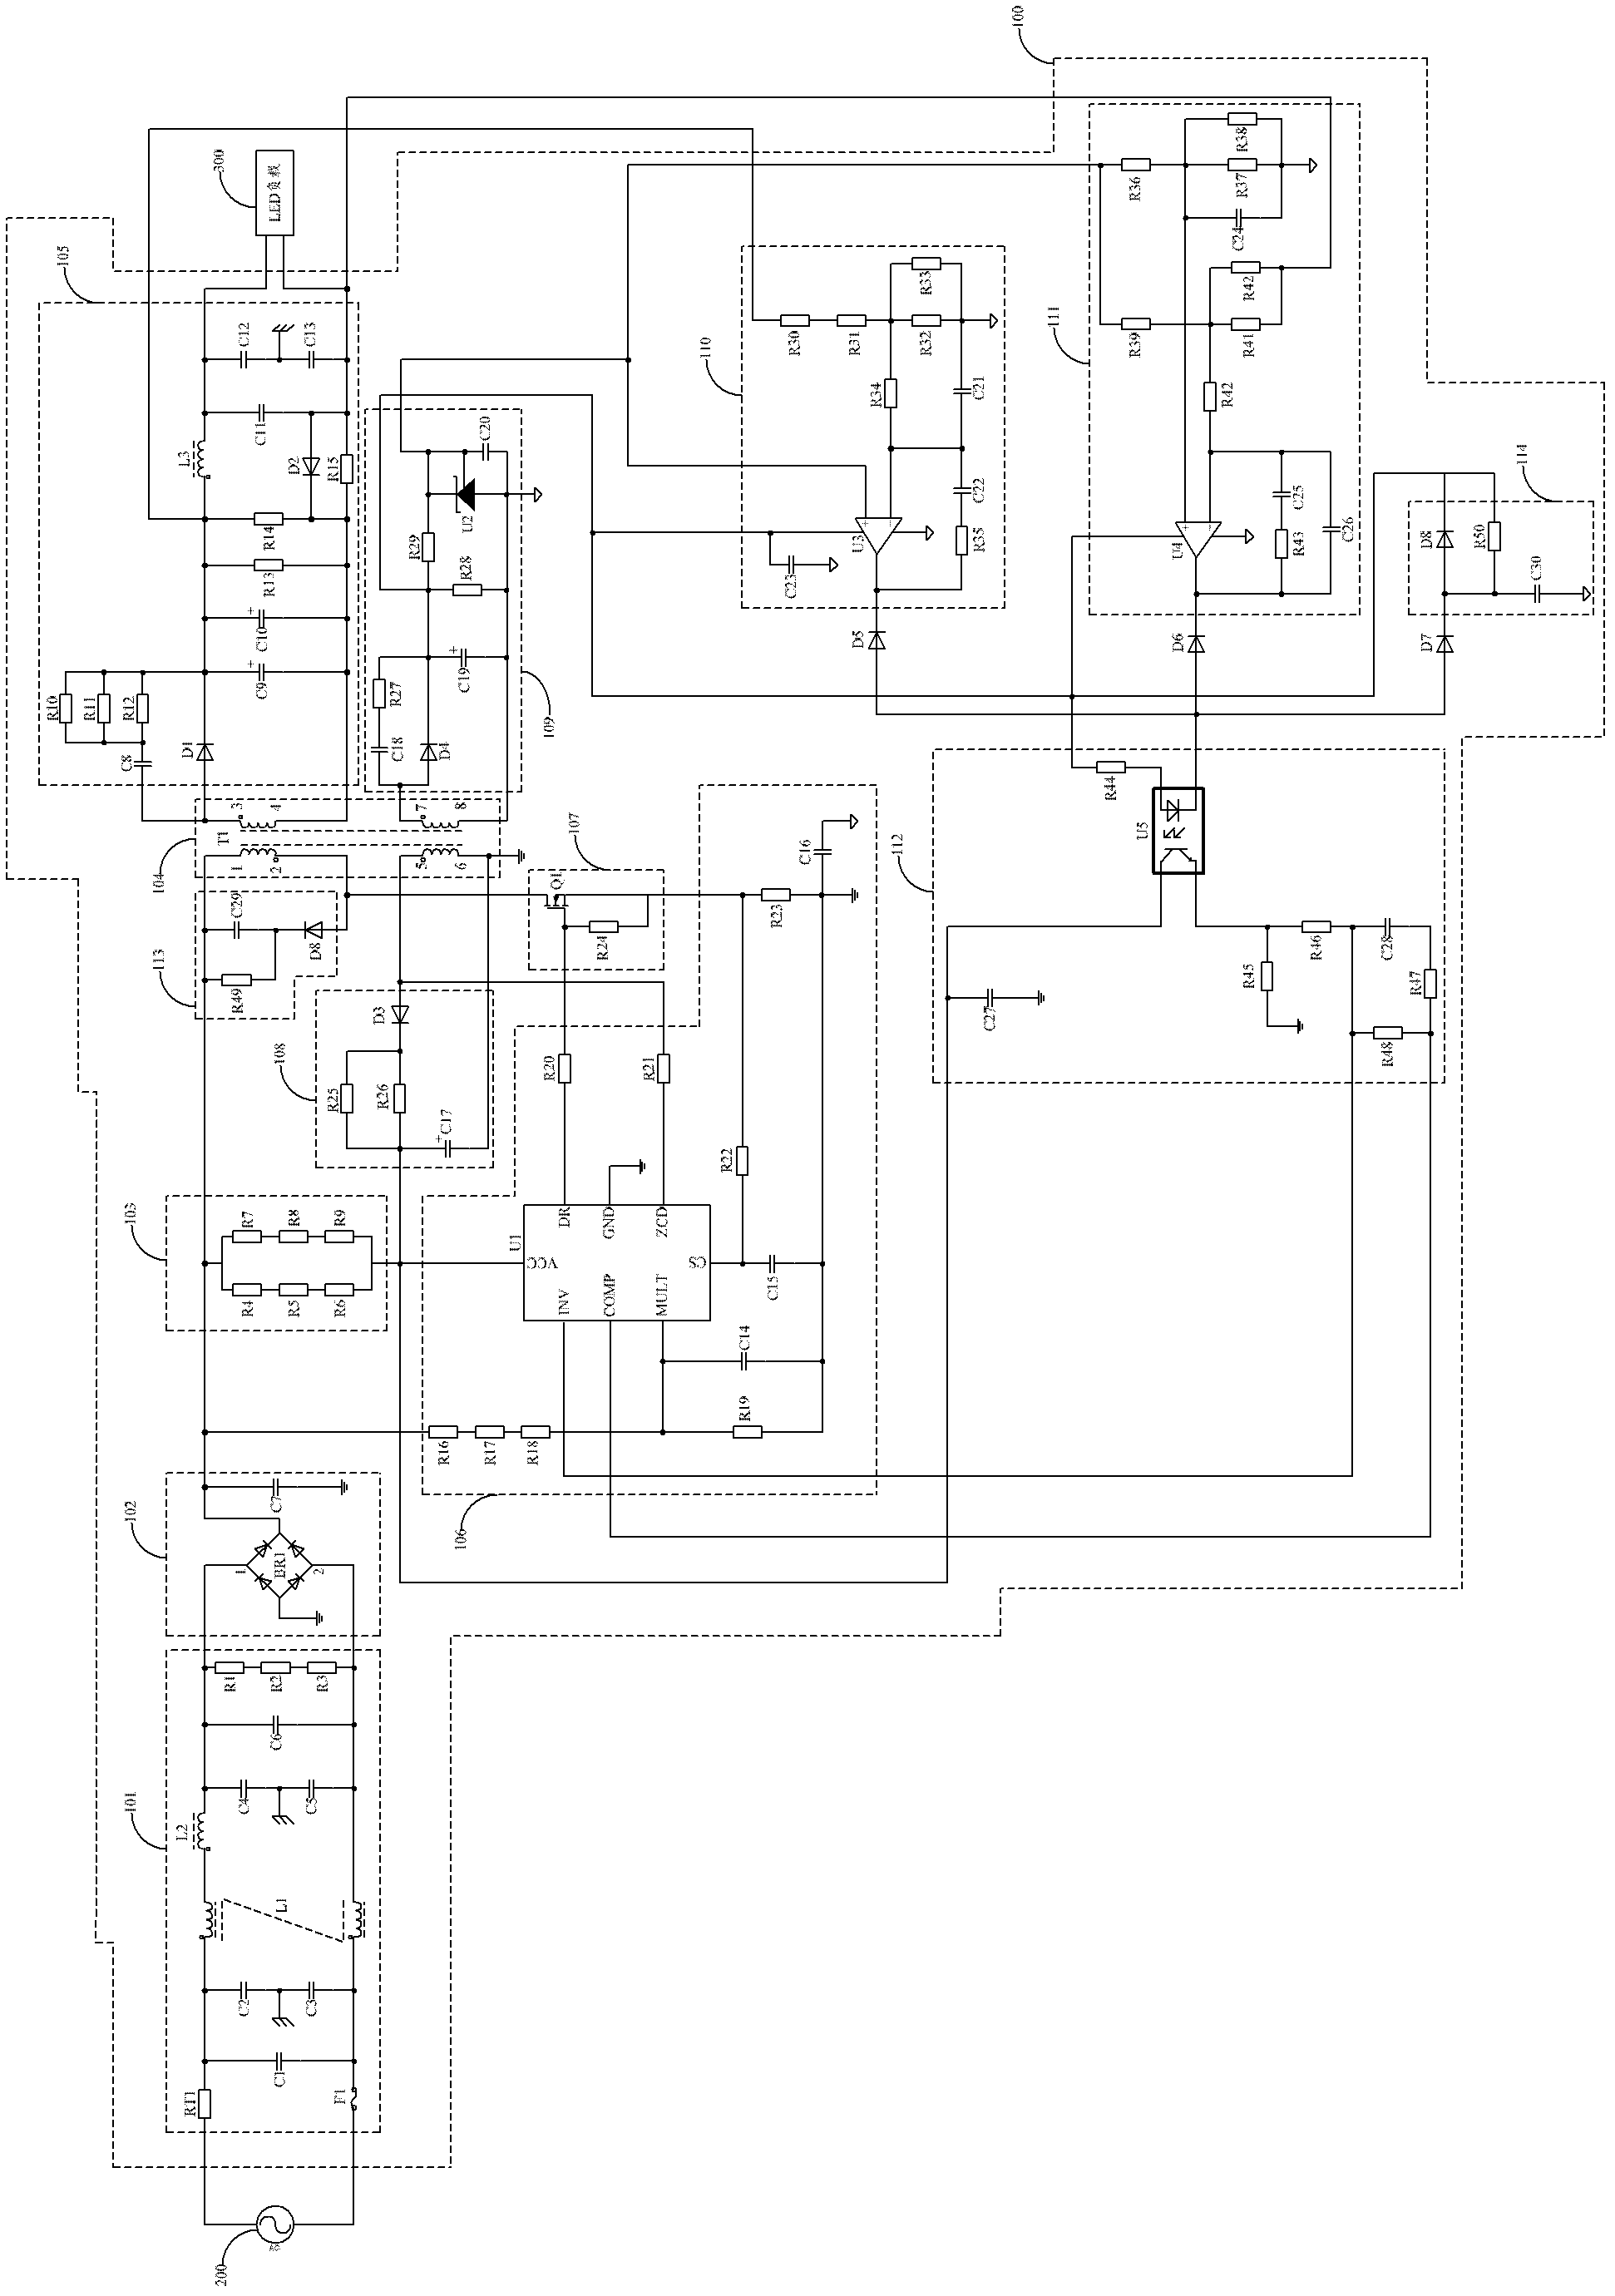 Light-emitting diode (LED) driving circuit and LED lamp